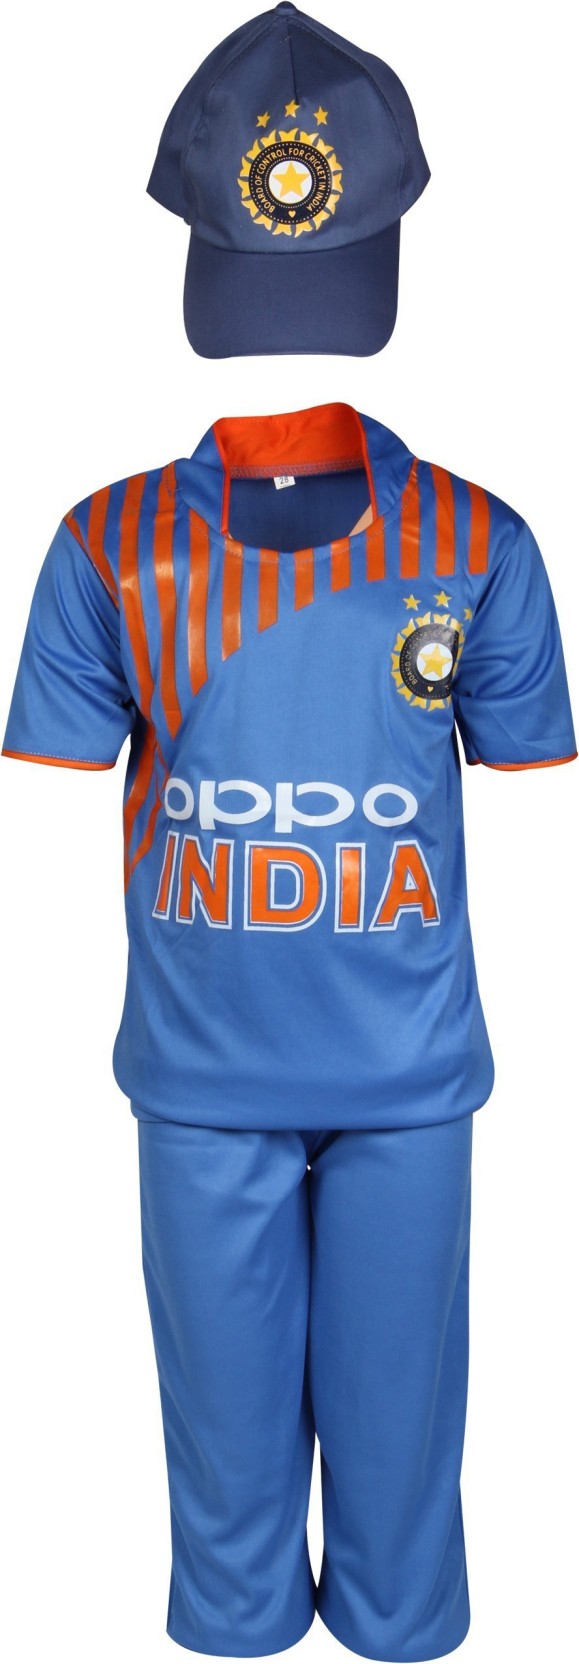 indian cricket jersey for infants